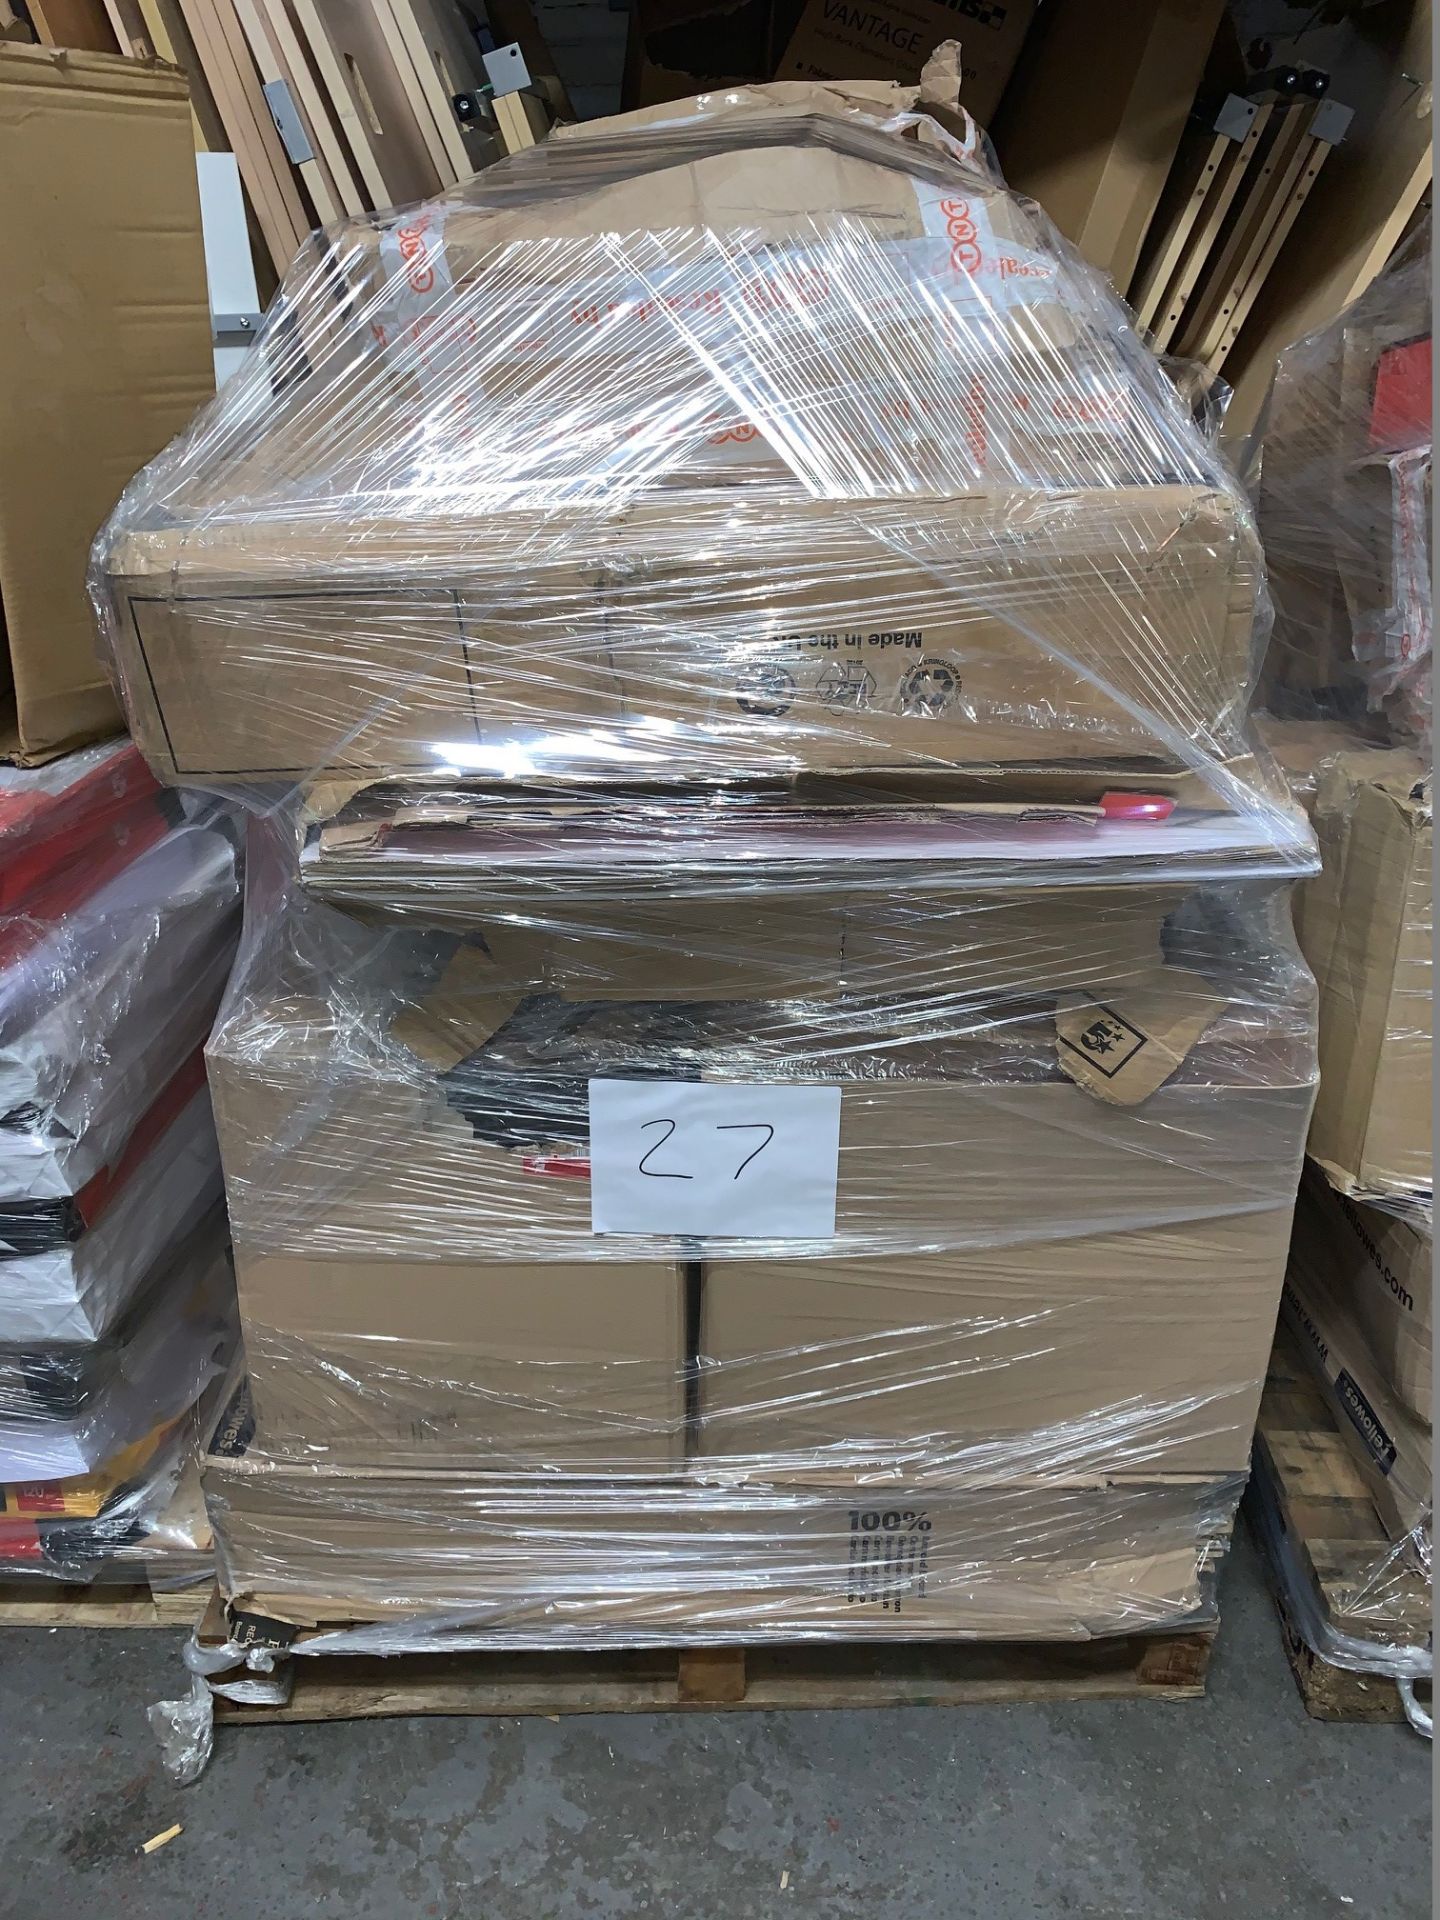 1 x Pallet of Mixed Stock/Stationery Including Box Files, Bankers Boxes, Lever Arch Files,